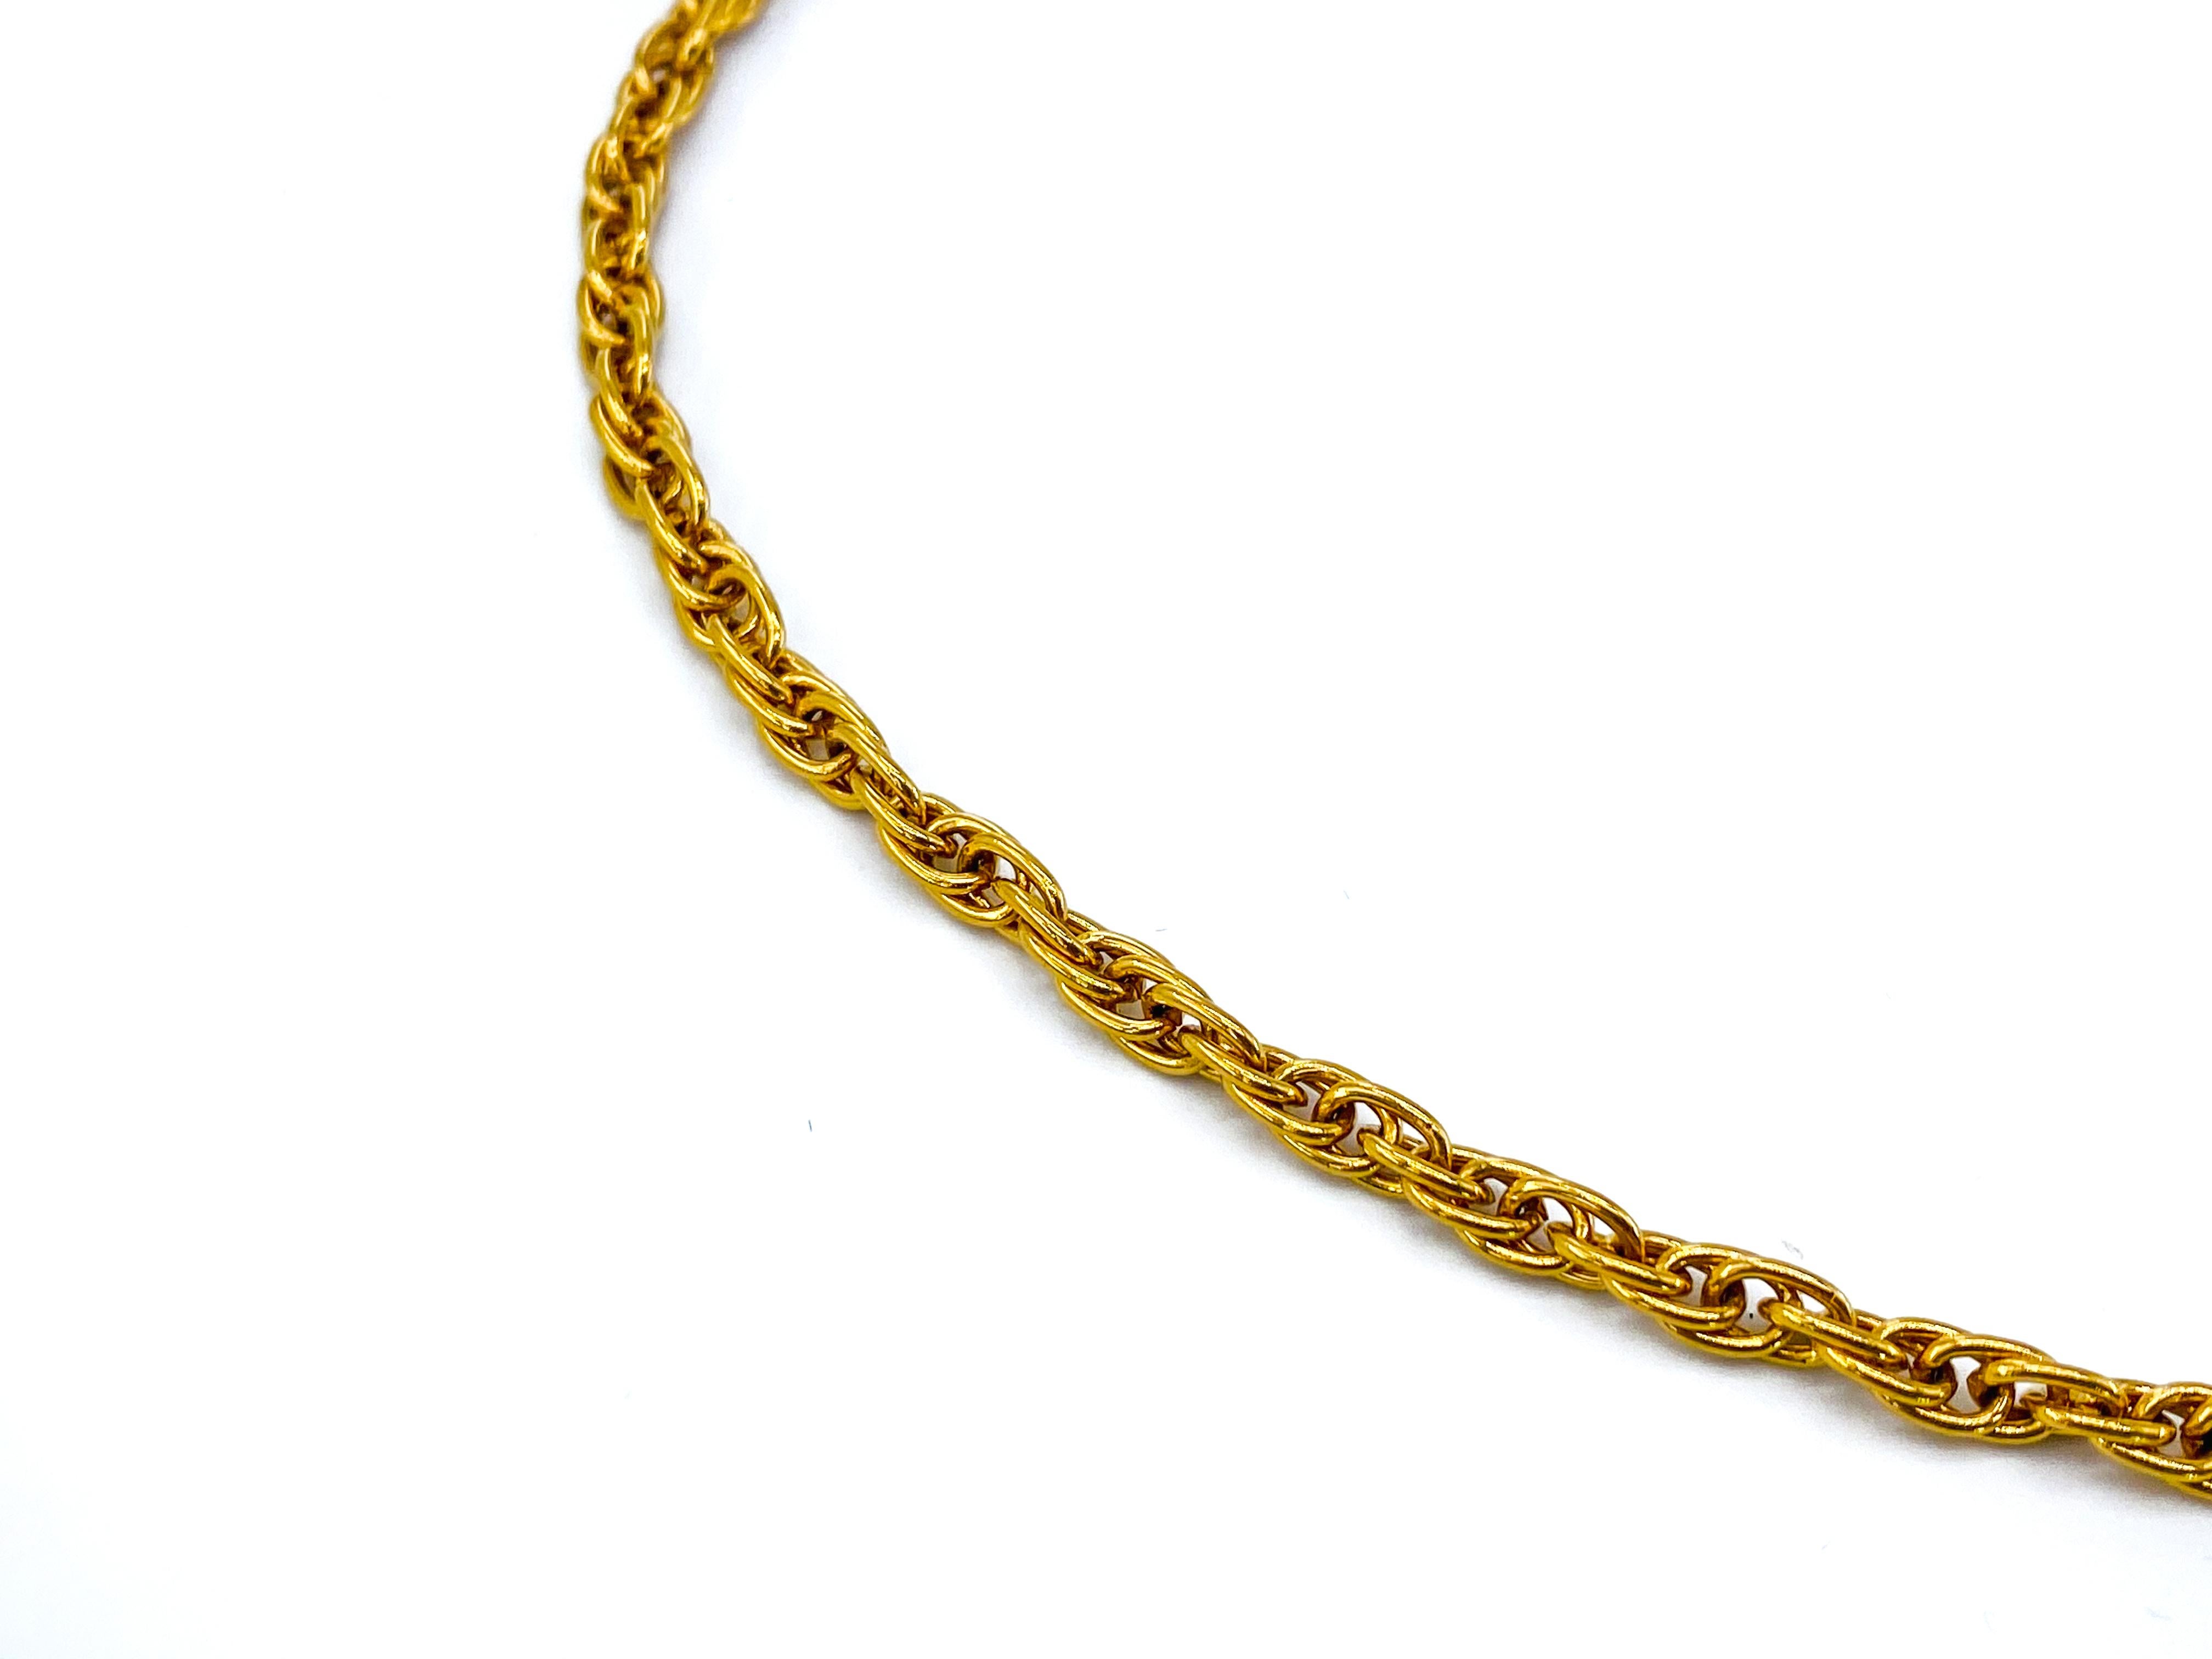 CHANEL Necklace Vintage 1980s Chain Choker 2